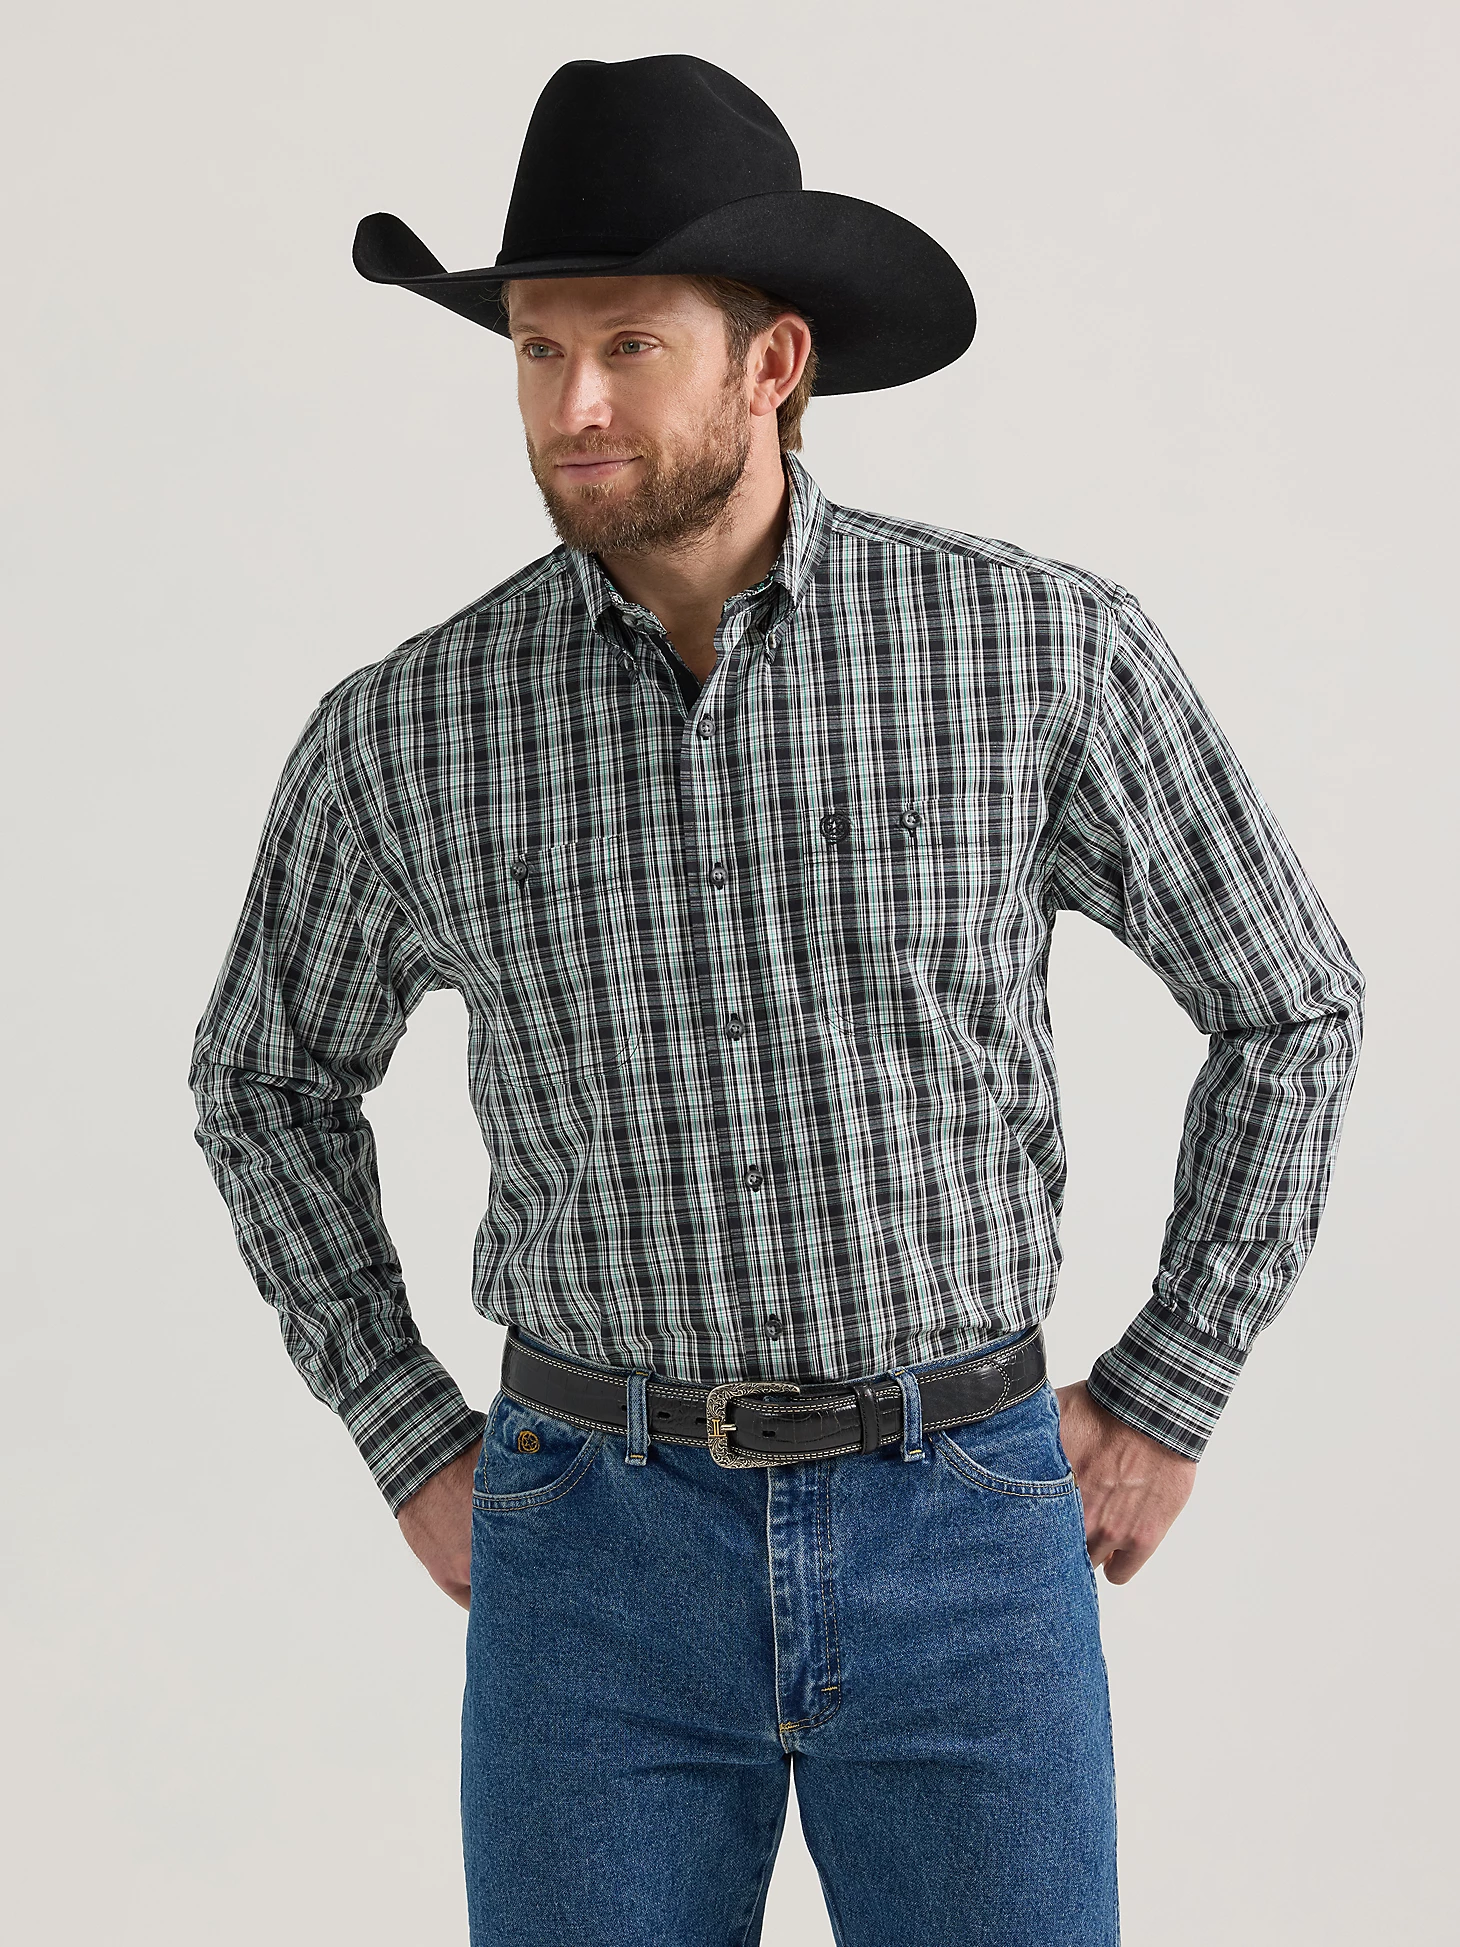 WRANGLER® GEORGE STRAIT™ LONG SLEEVE BUTTON DOWN TWO POCKET SHIRT